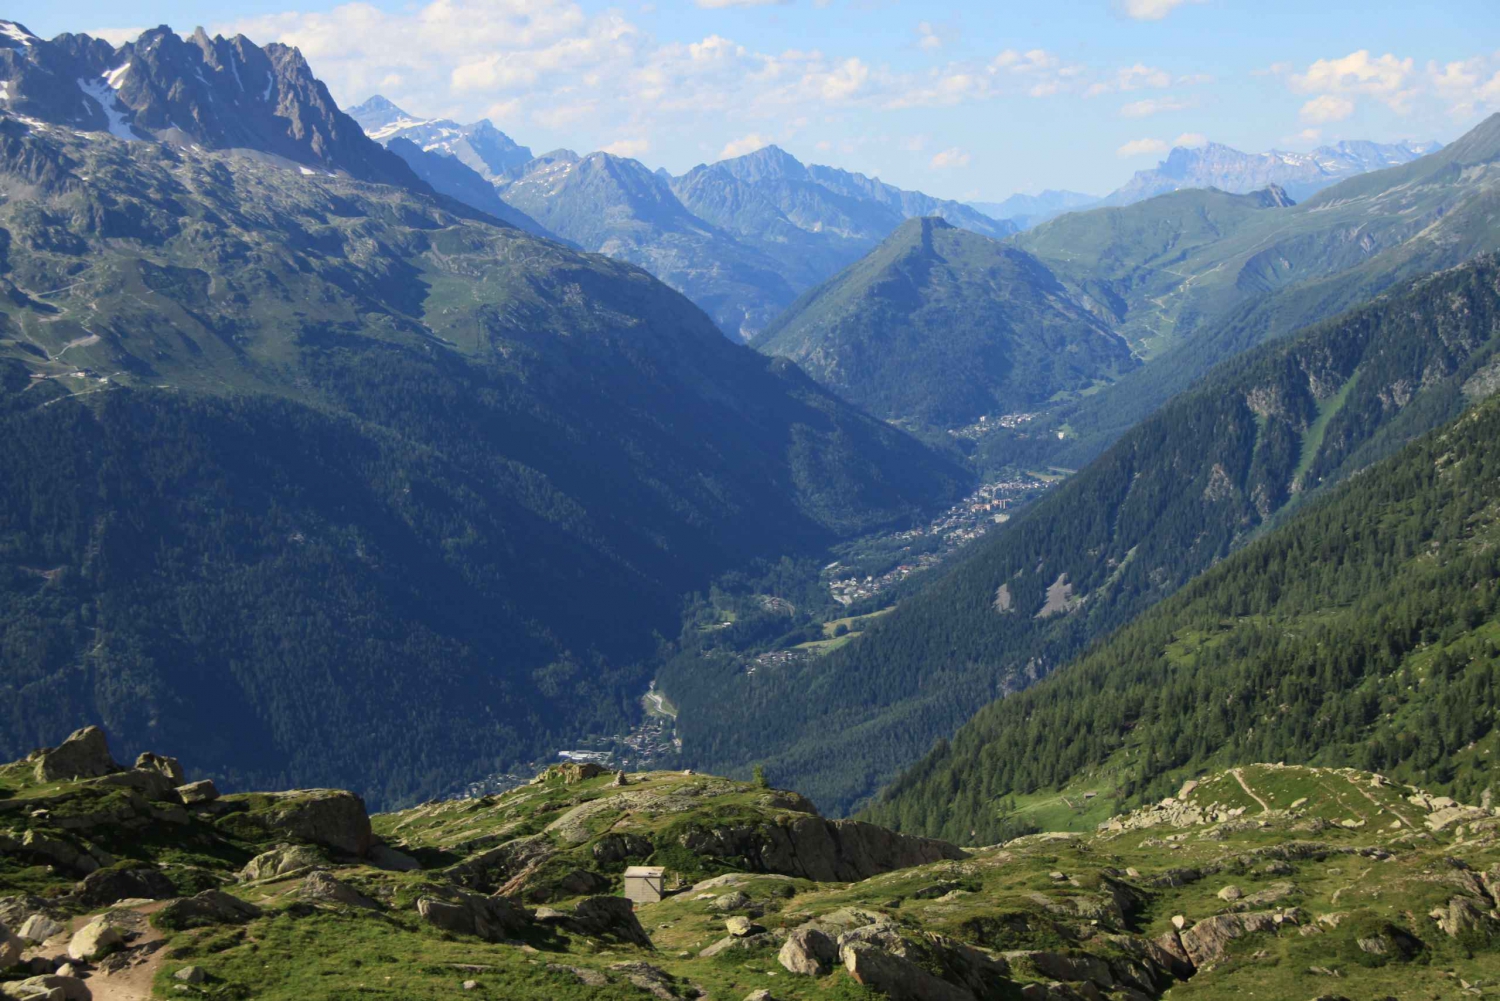 Chamonix: Full-Day Cable Car and Train Tour from Geneva